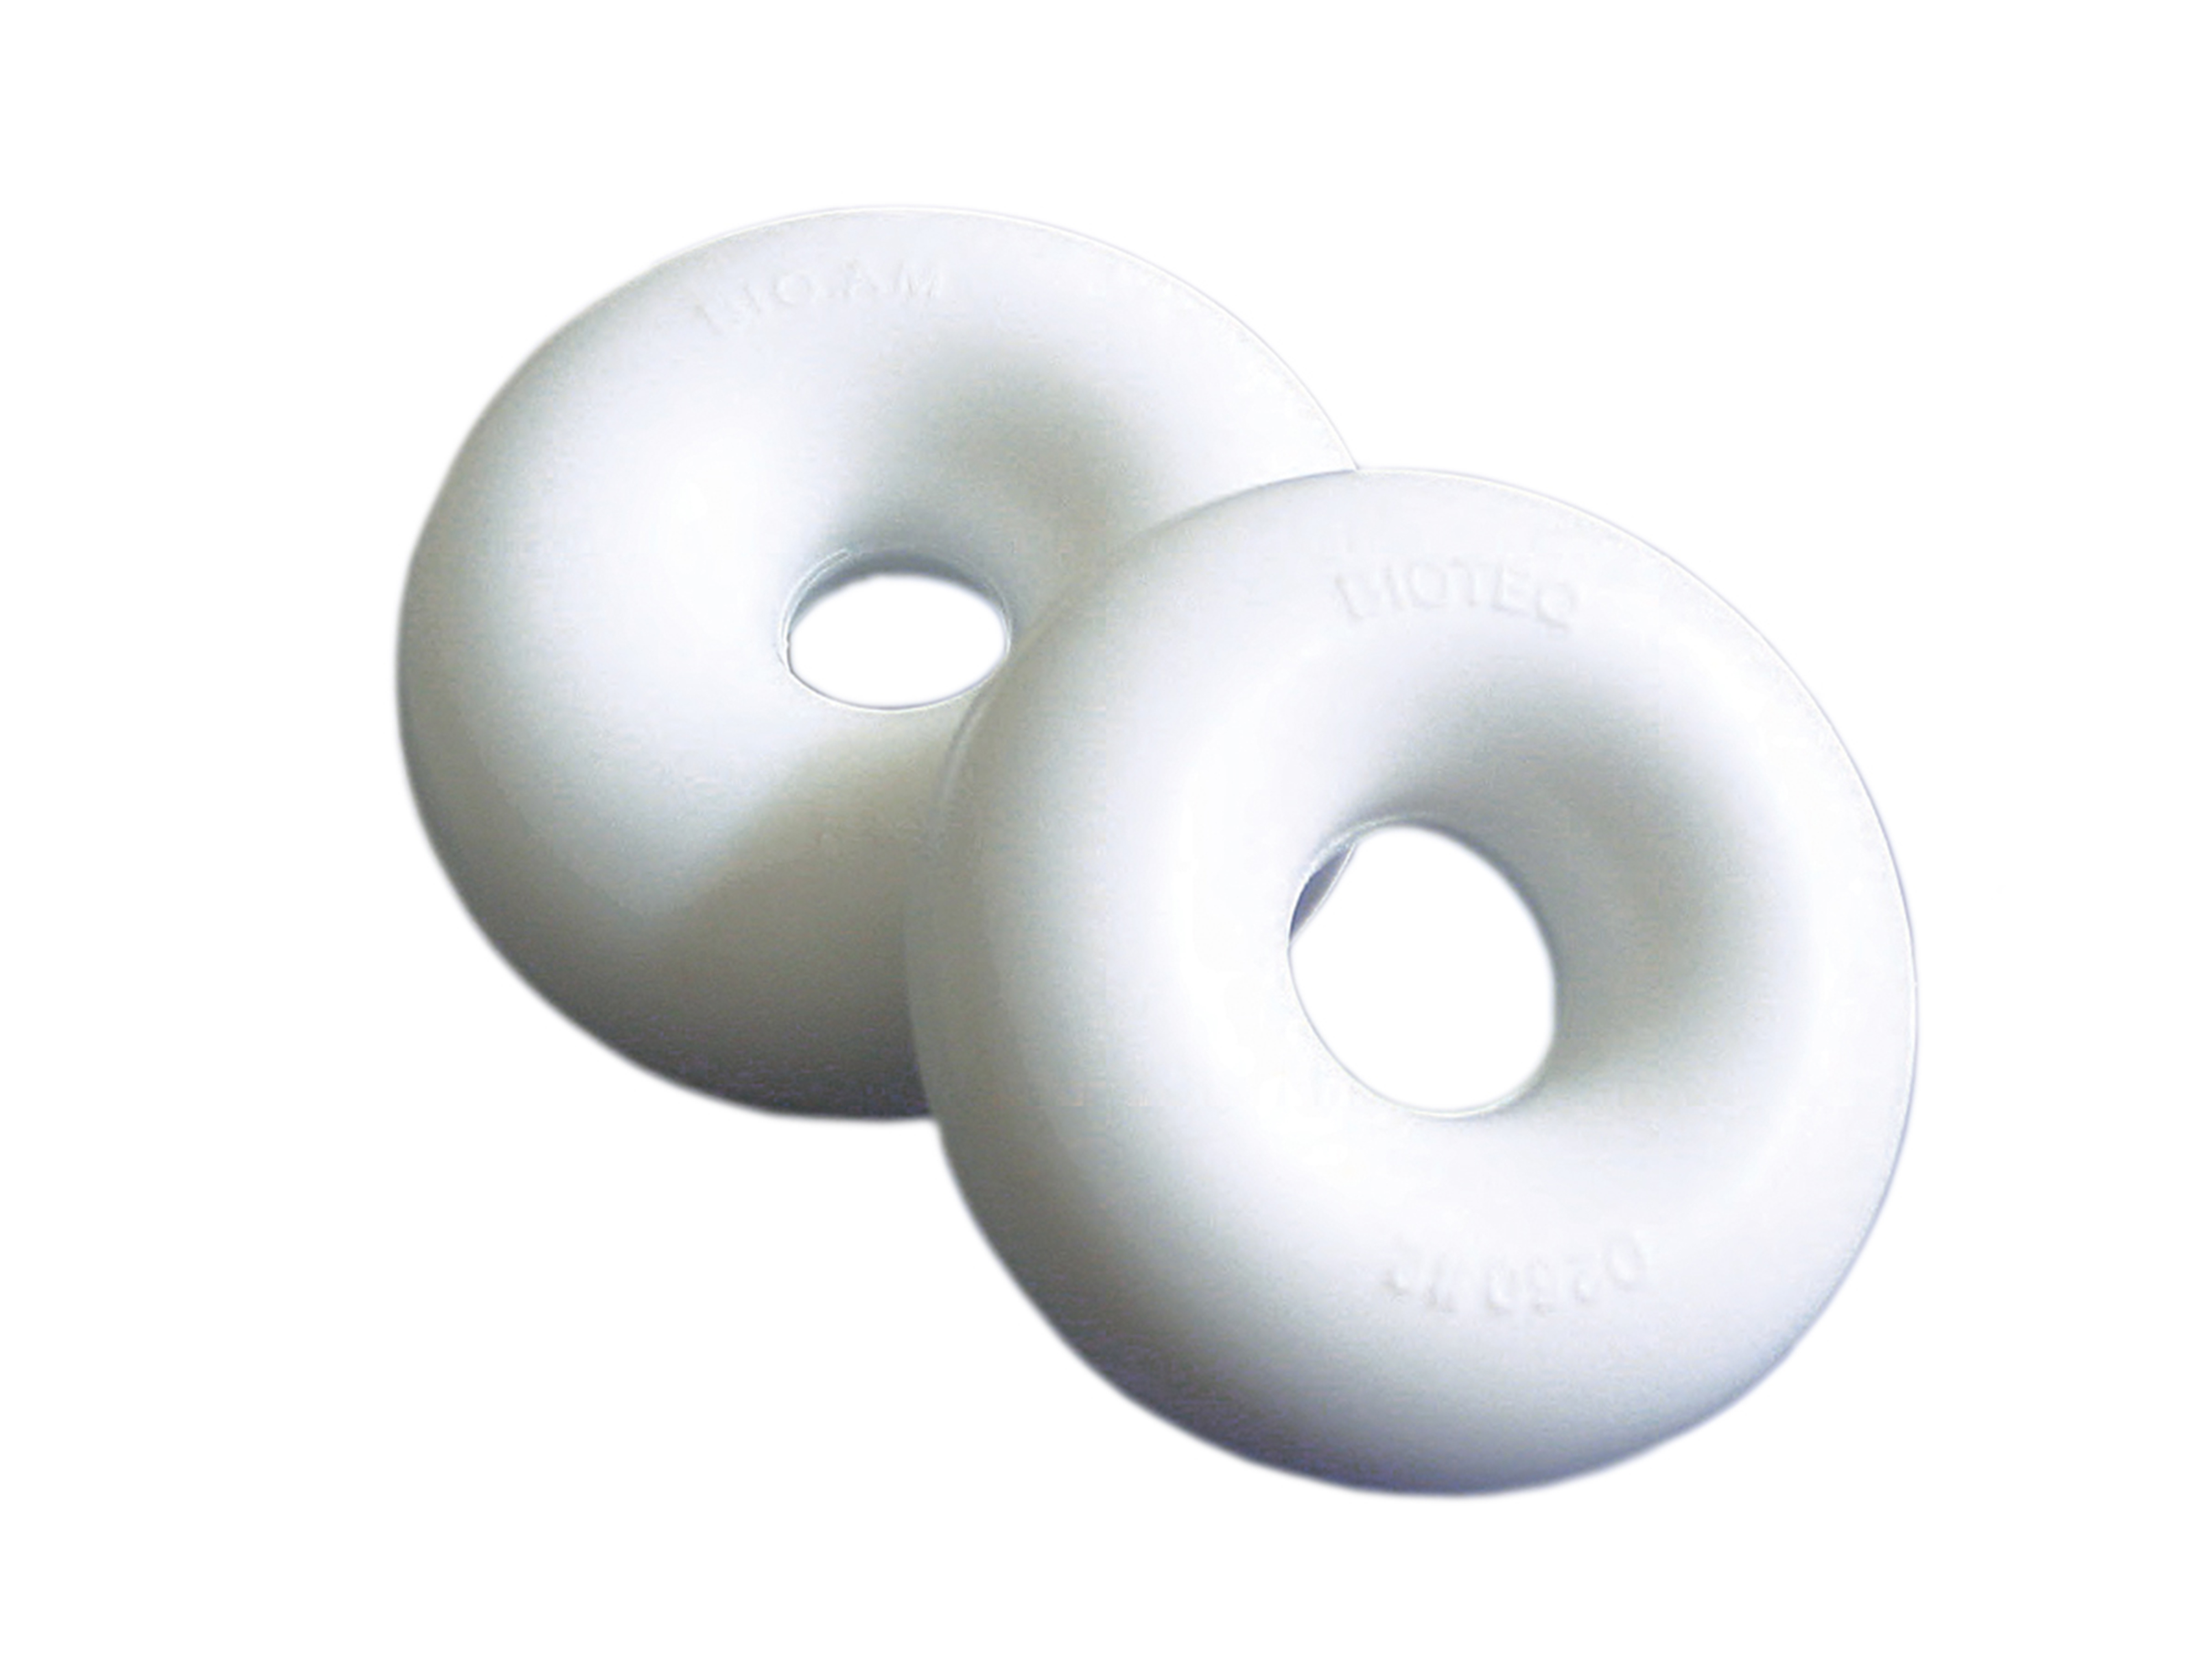 MedGyn Pessary Silicone Donut #4 3 inches or 76 mm